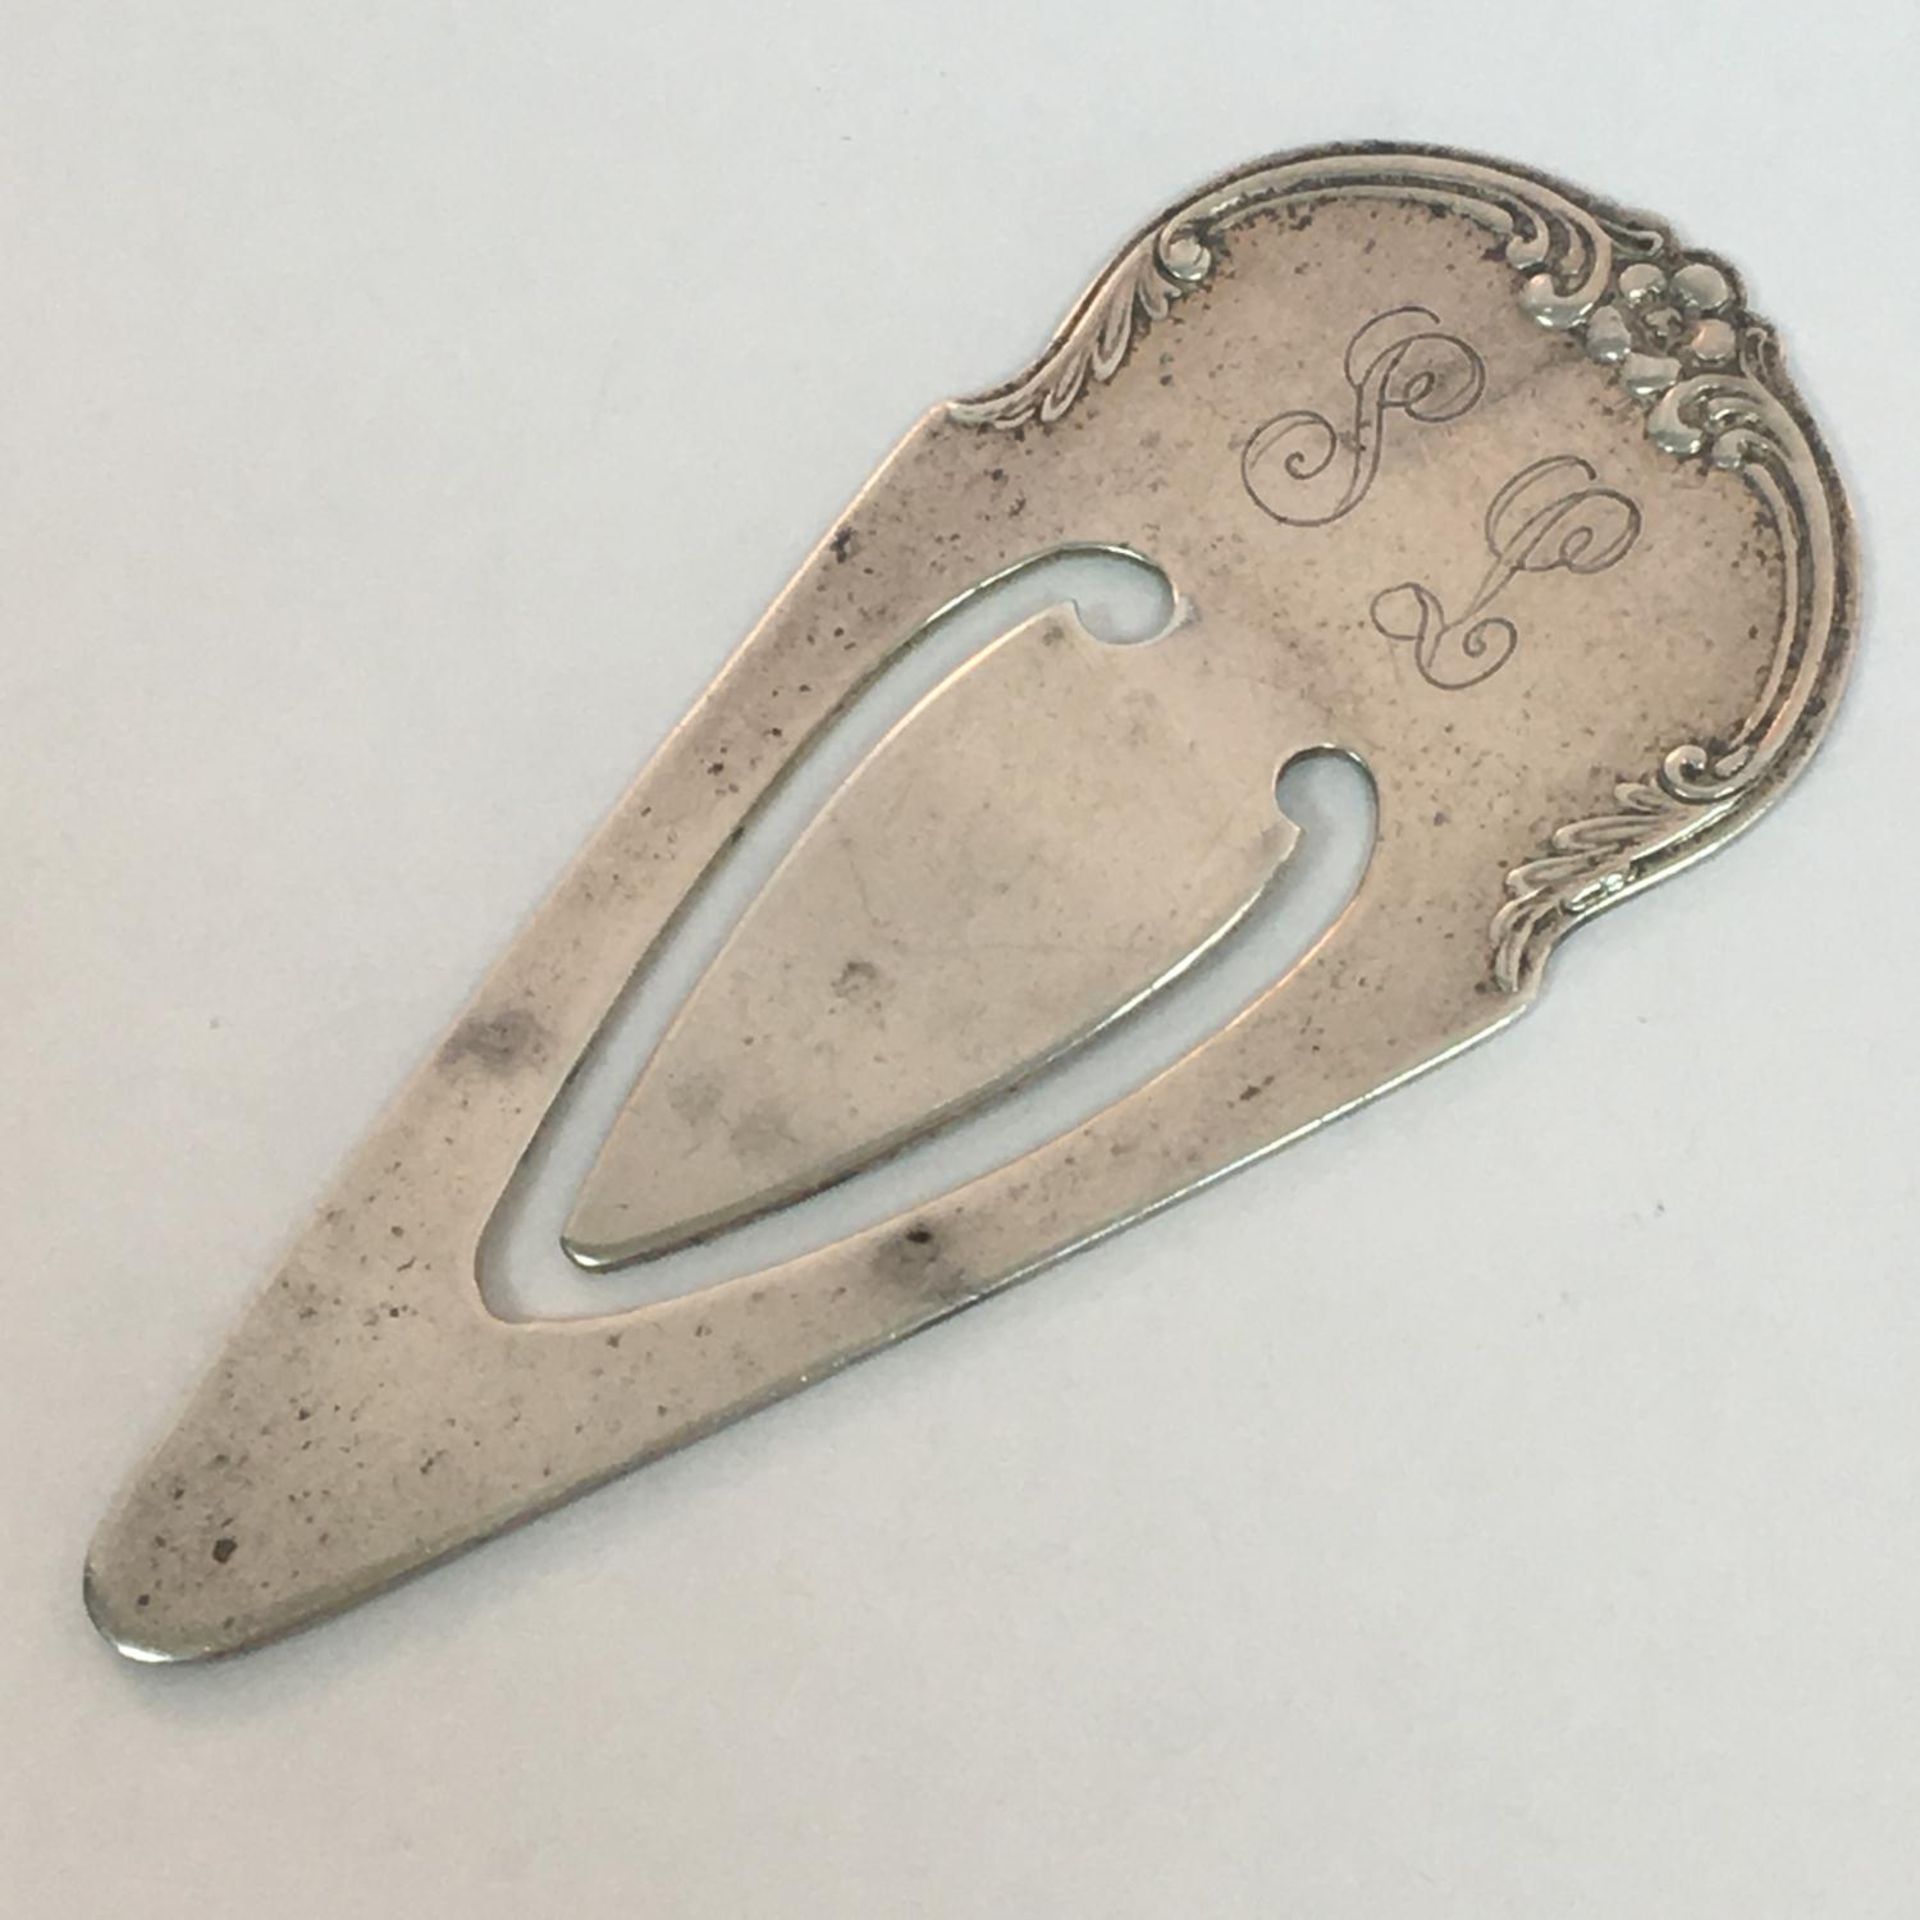 Vintage repousse sterling silver bookmark by fine Baltimore silversmith S Kirk & Son, monogrammed